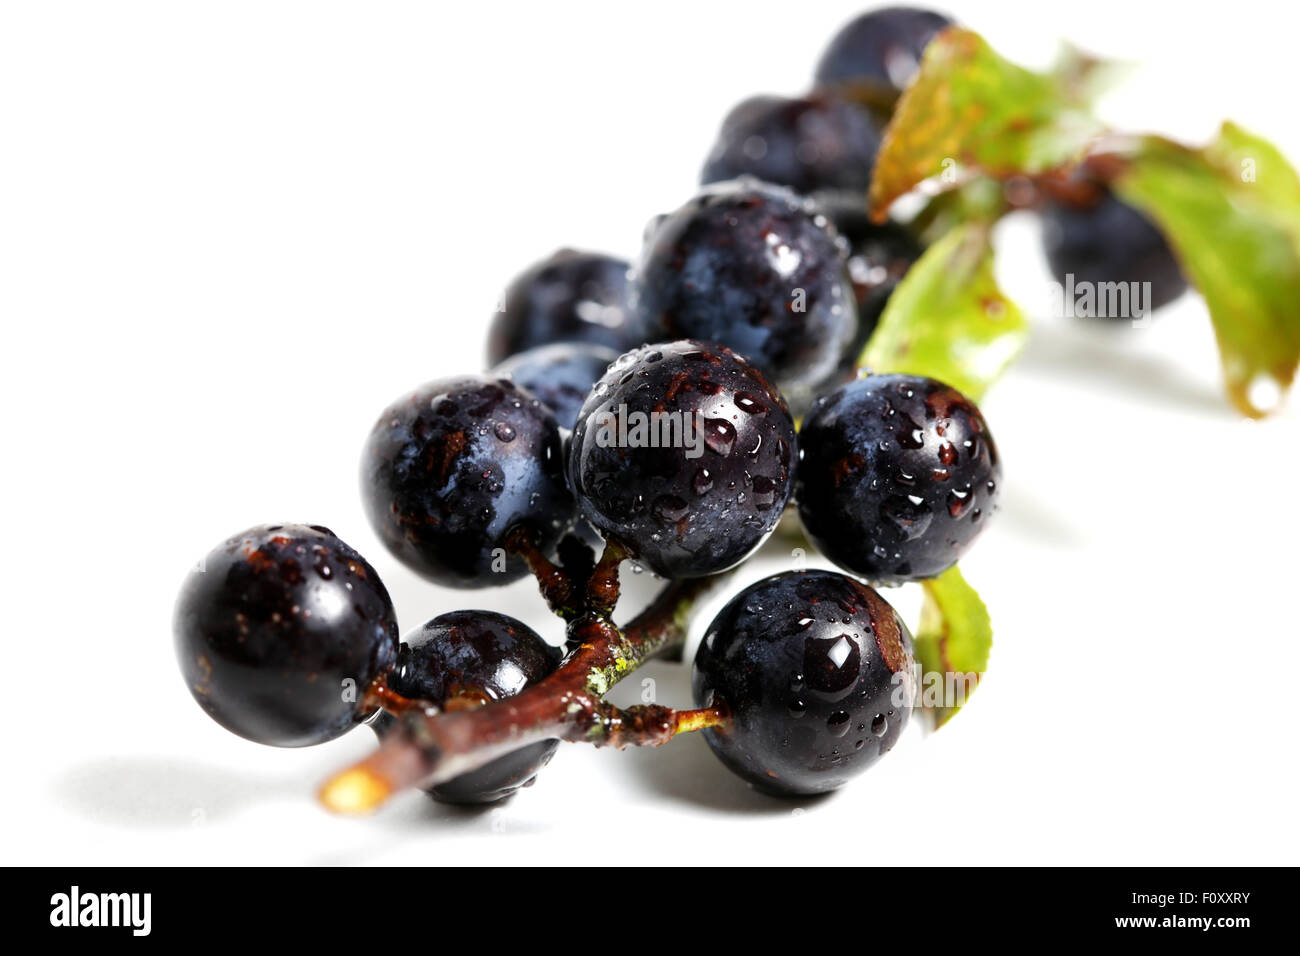 Sloes on a branch shot against a plain white background Stock Photo